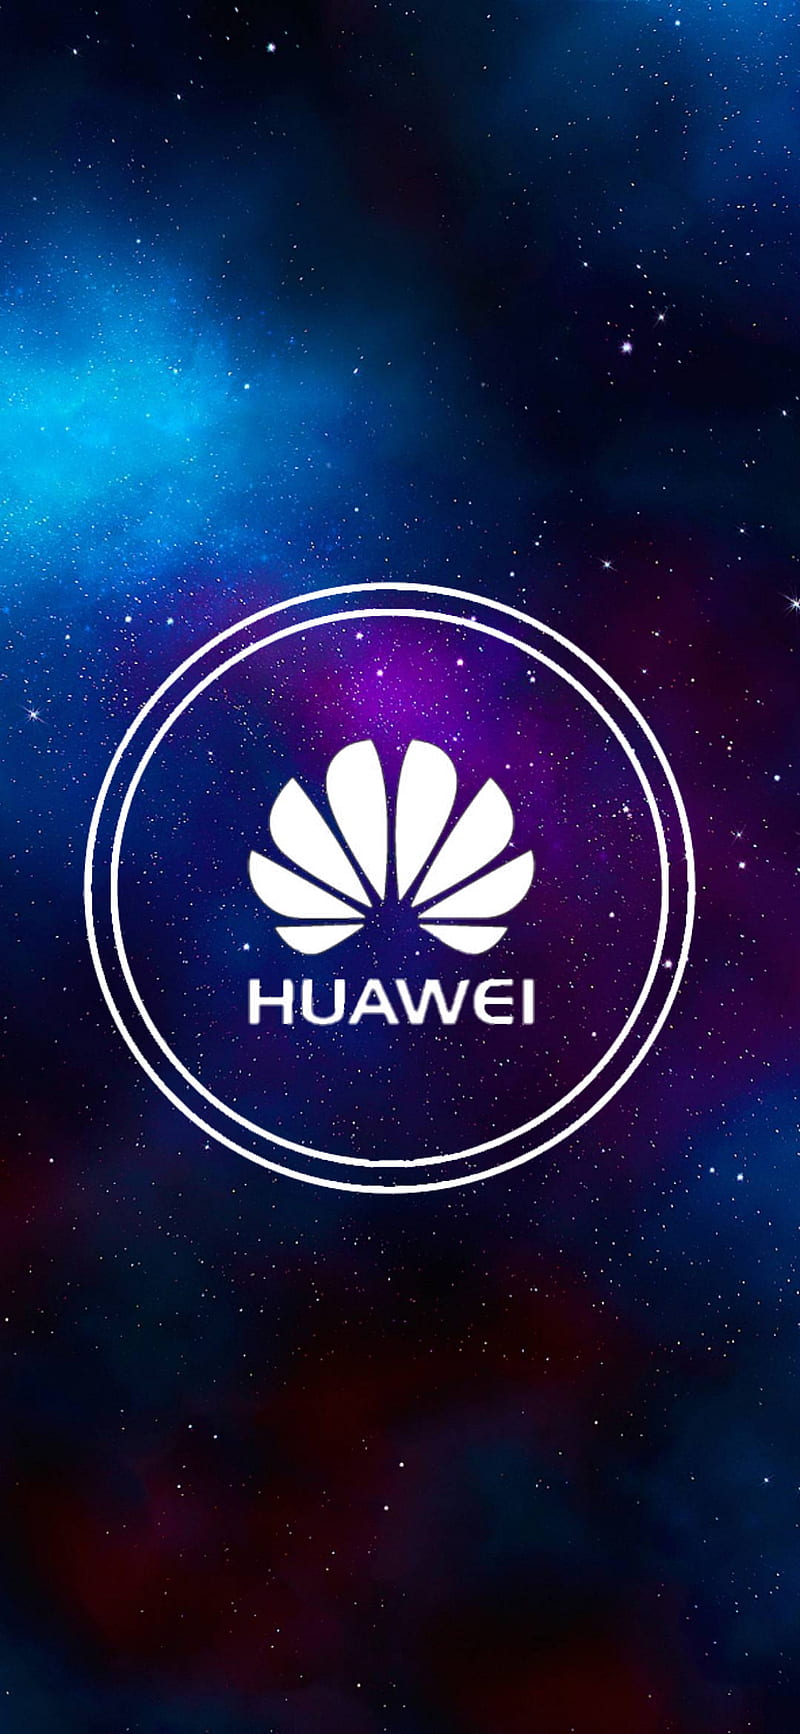 Huawei wallpaper by PhotoBuzzz - Download on ZEDGE™ | 9061